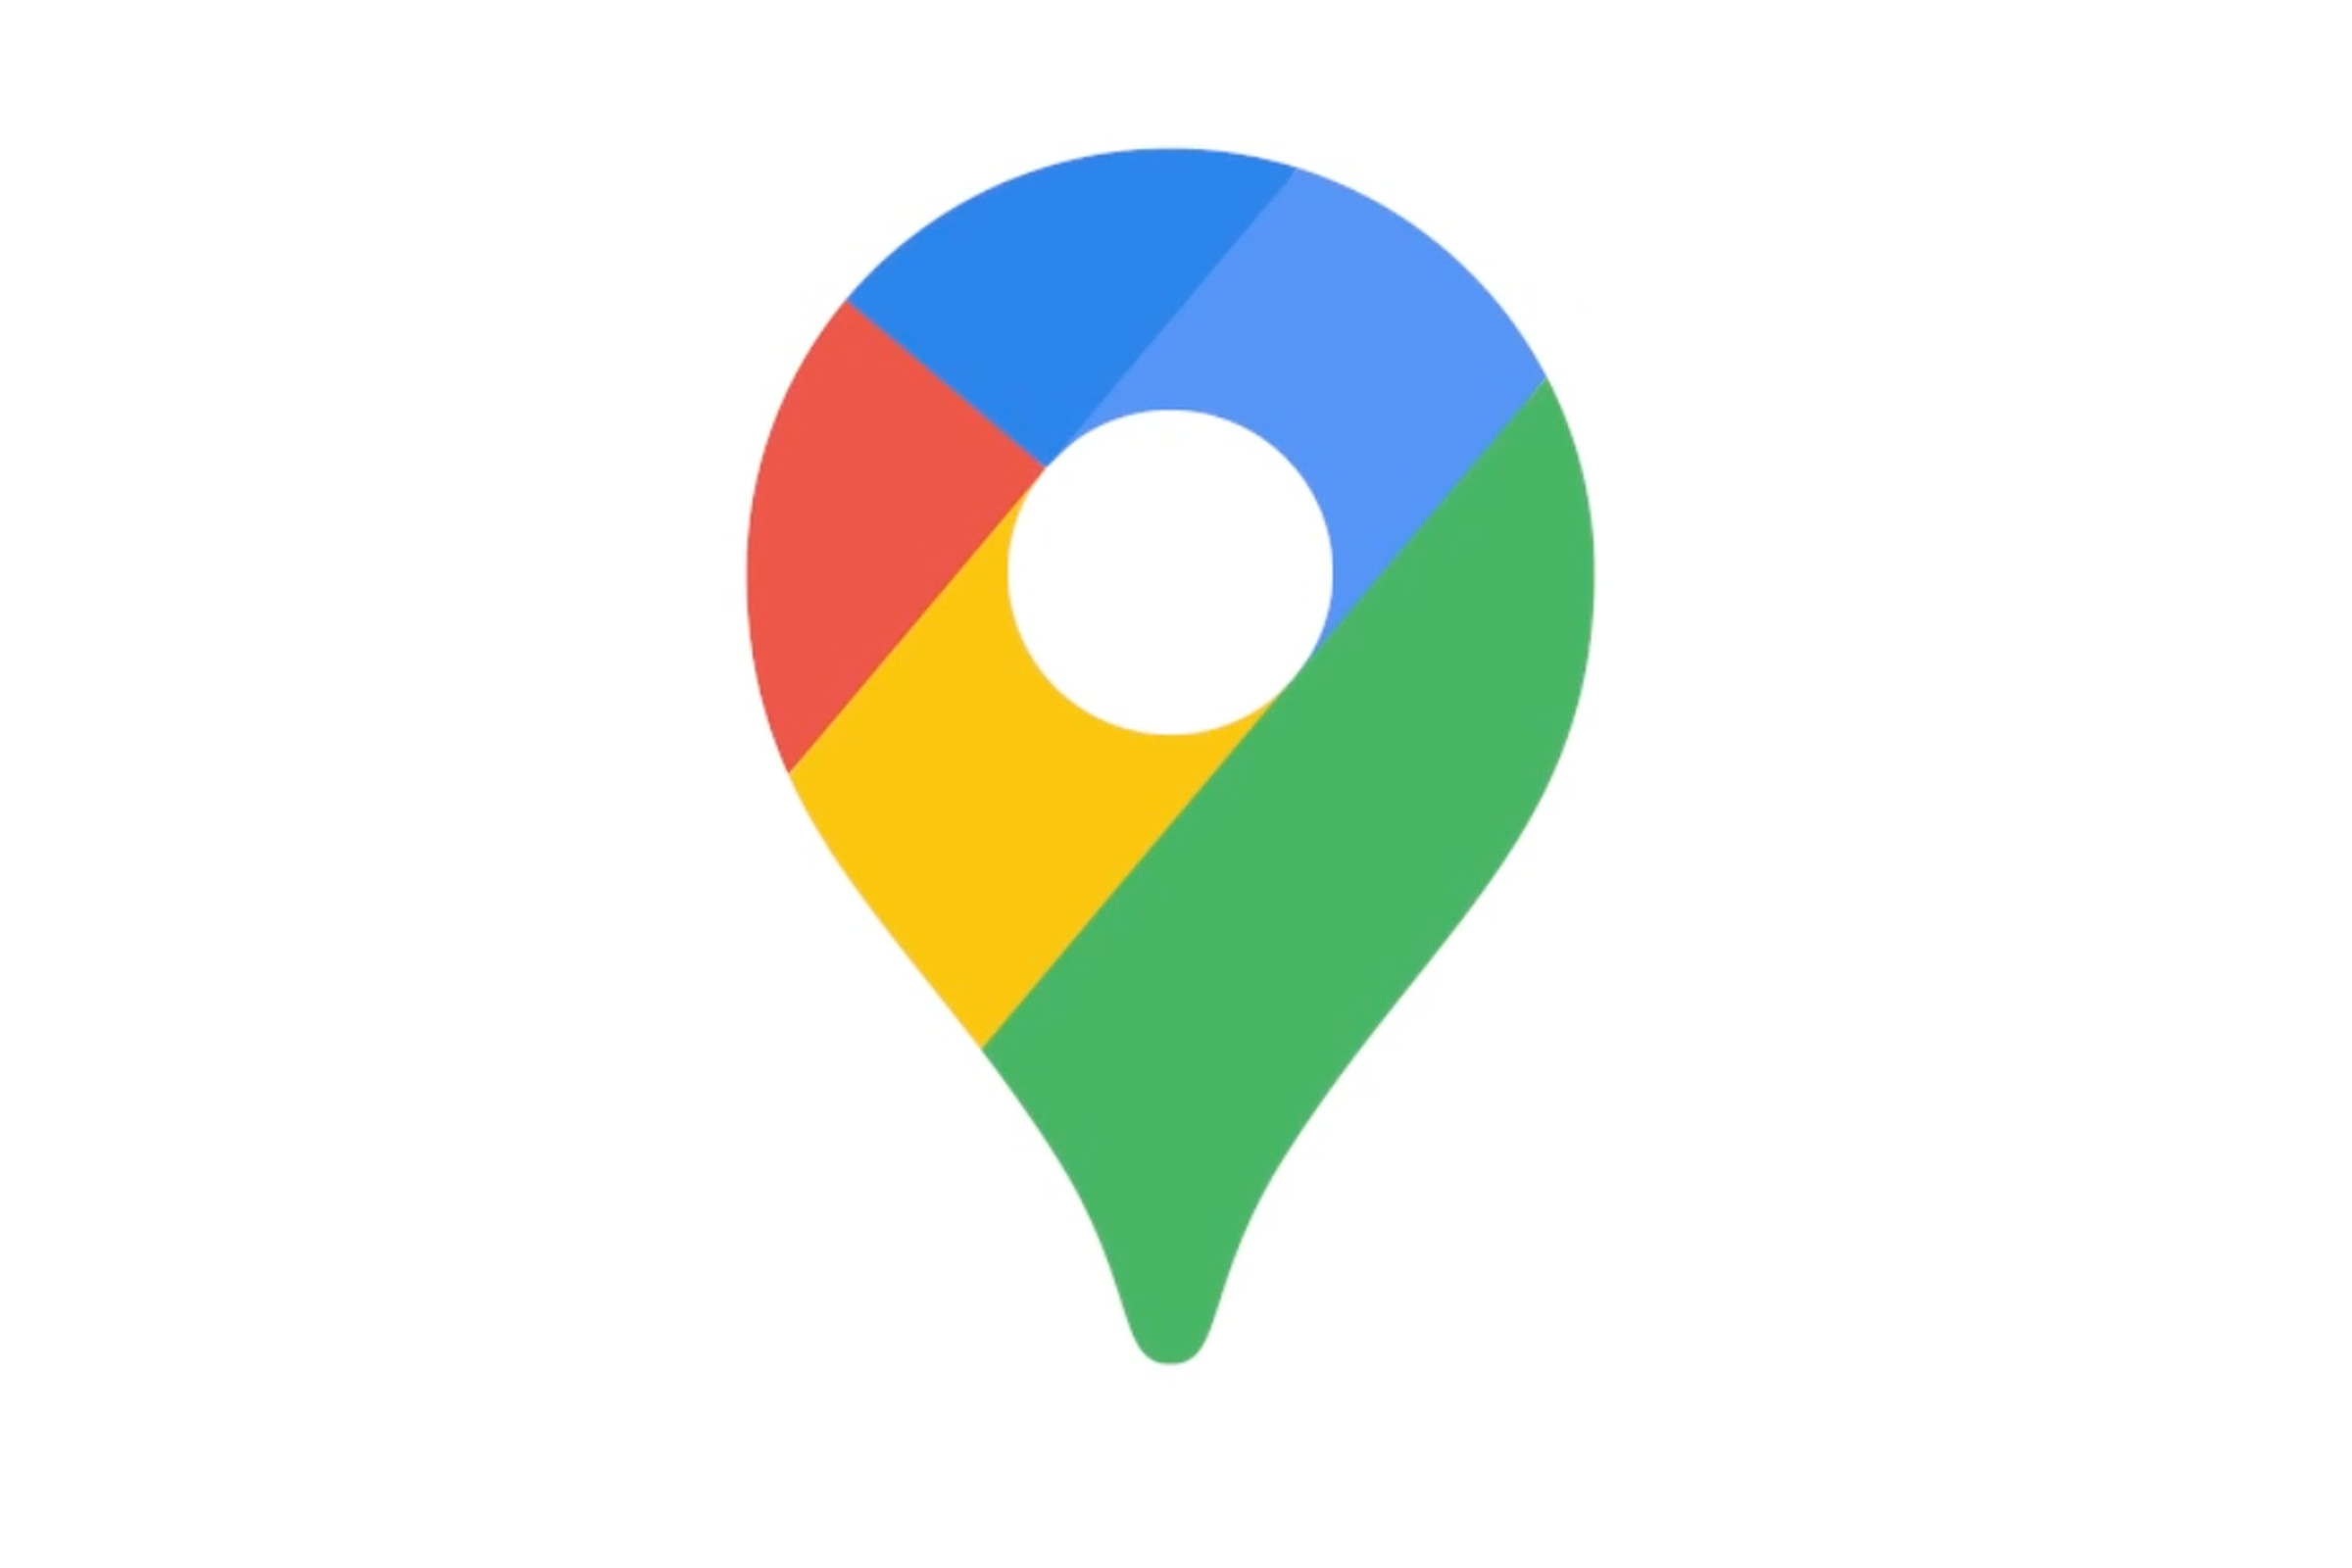 The new Google Maps icon.